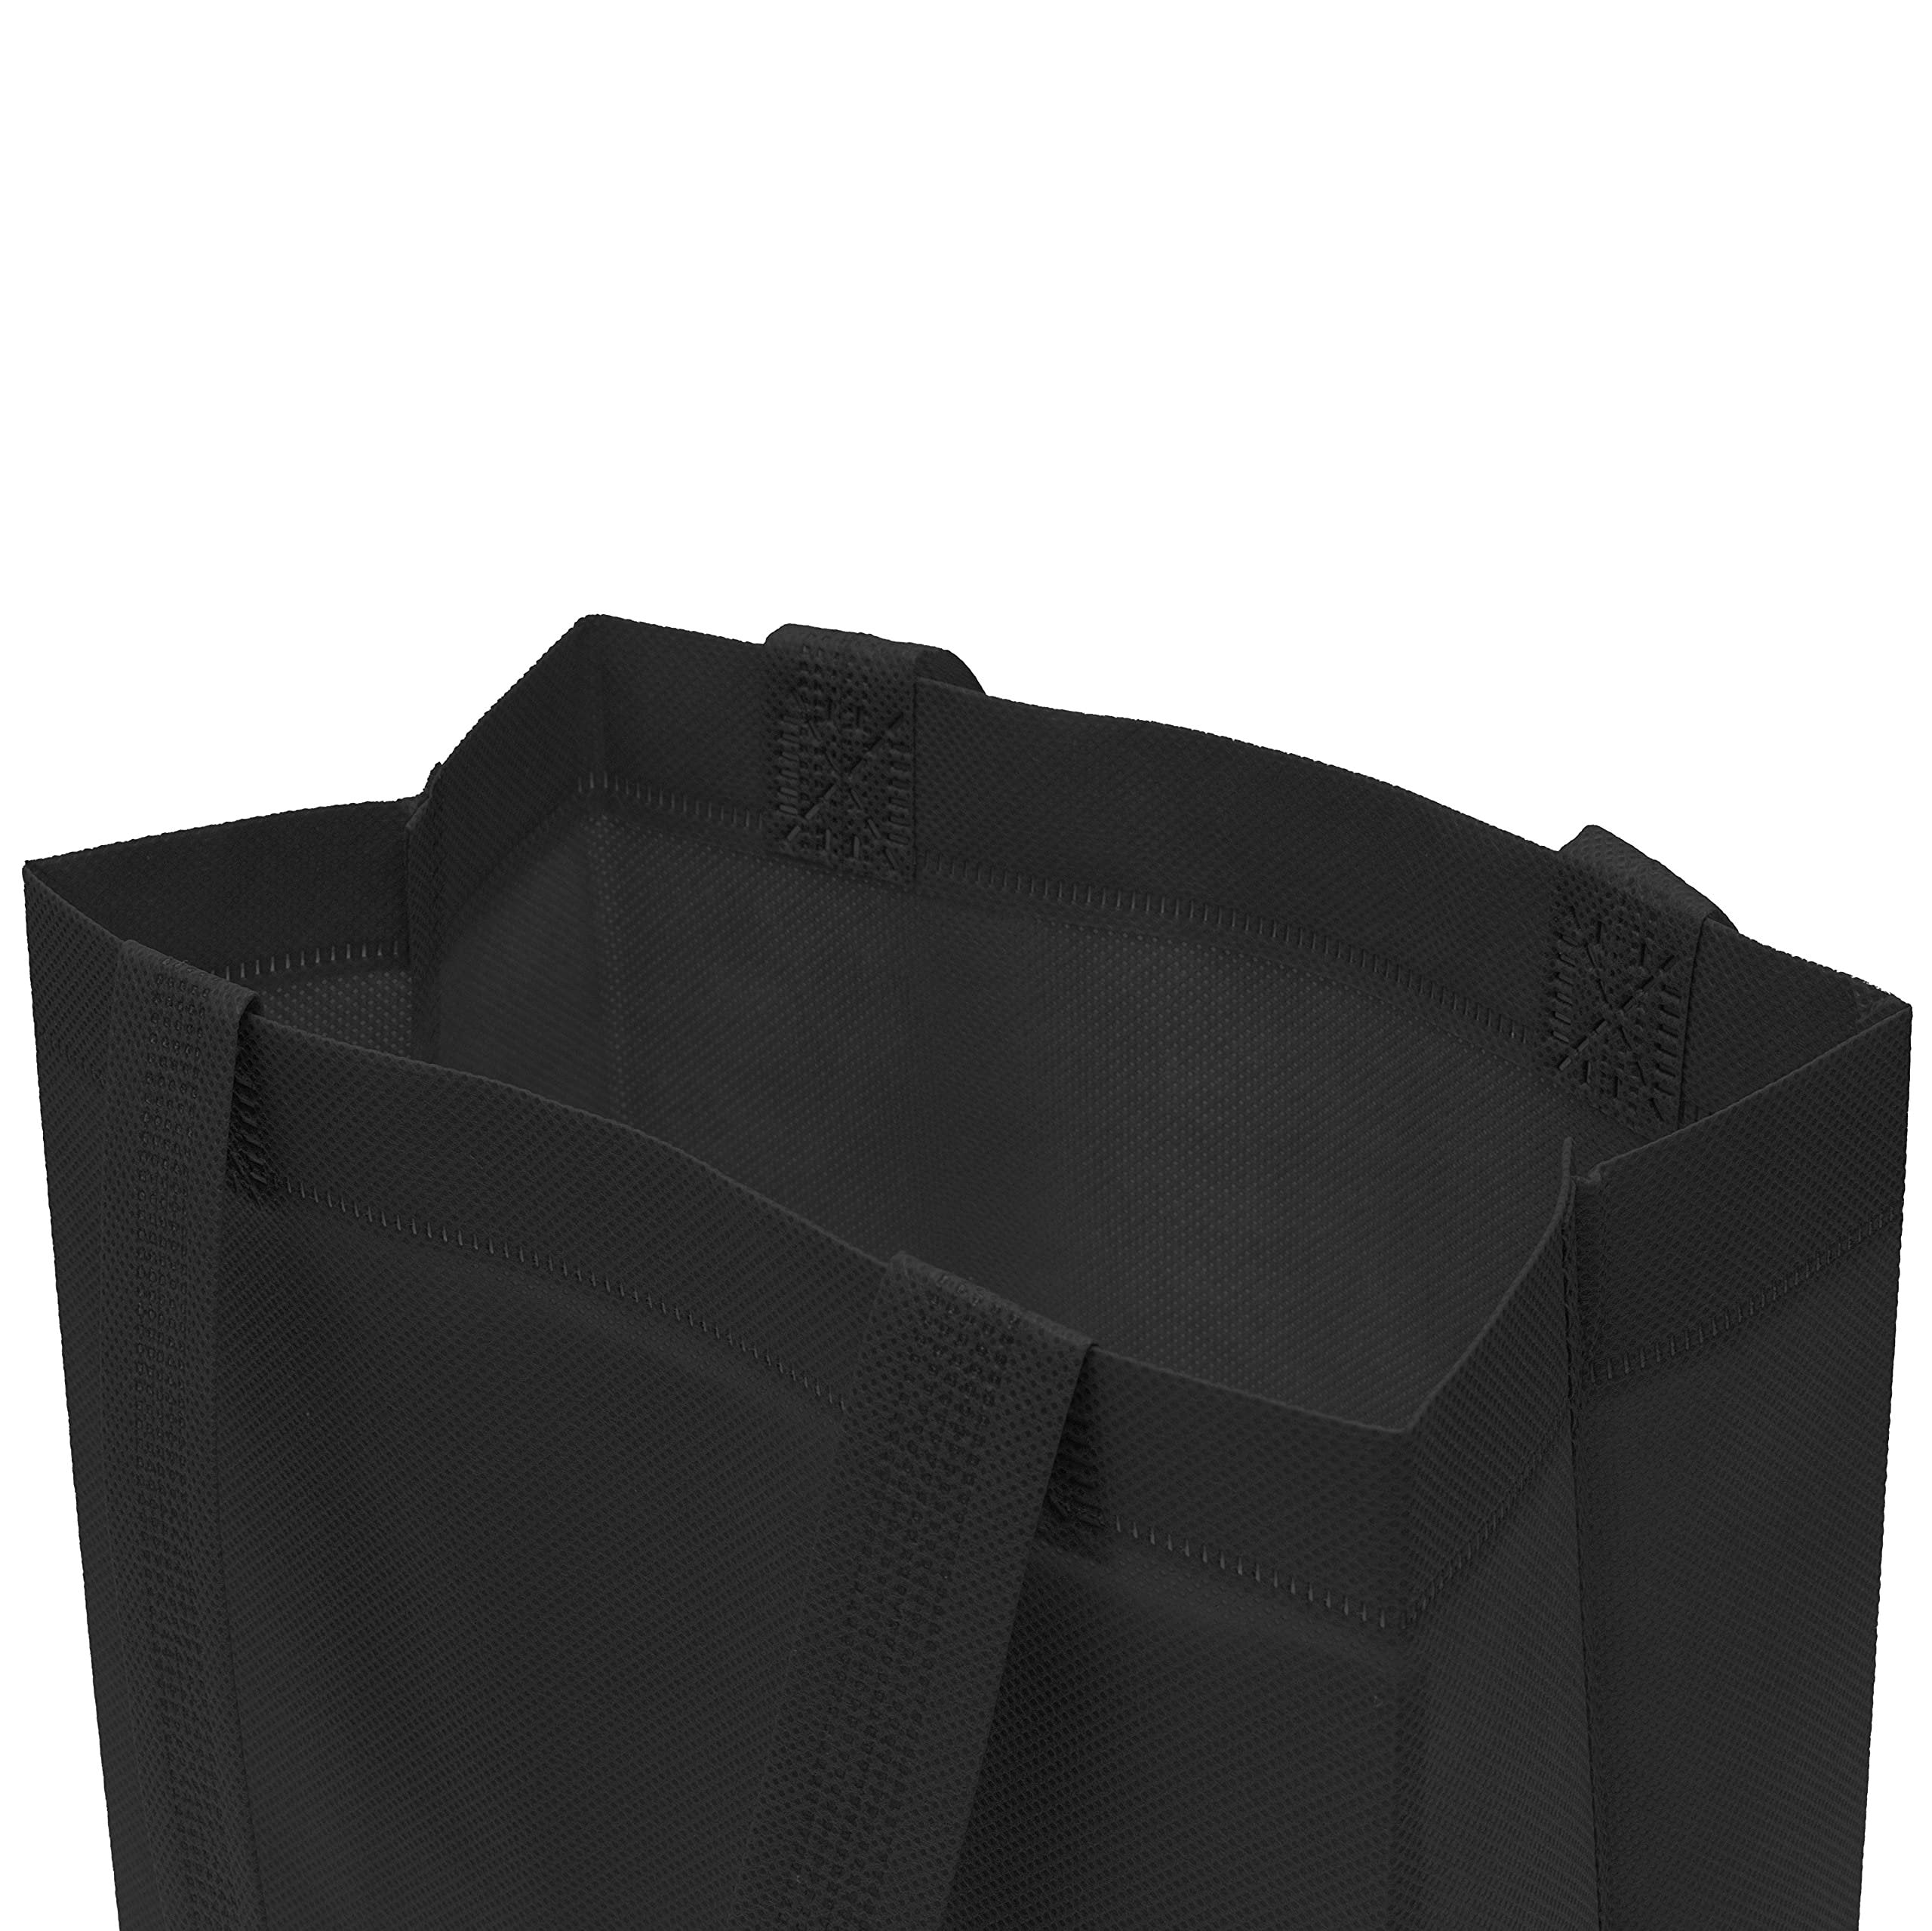 ZENPAC 8x4x10 Black Eco-Friendly Reusable Gift Bags - 12 Pack with Handles for Shopping, Events, Parties and More